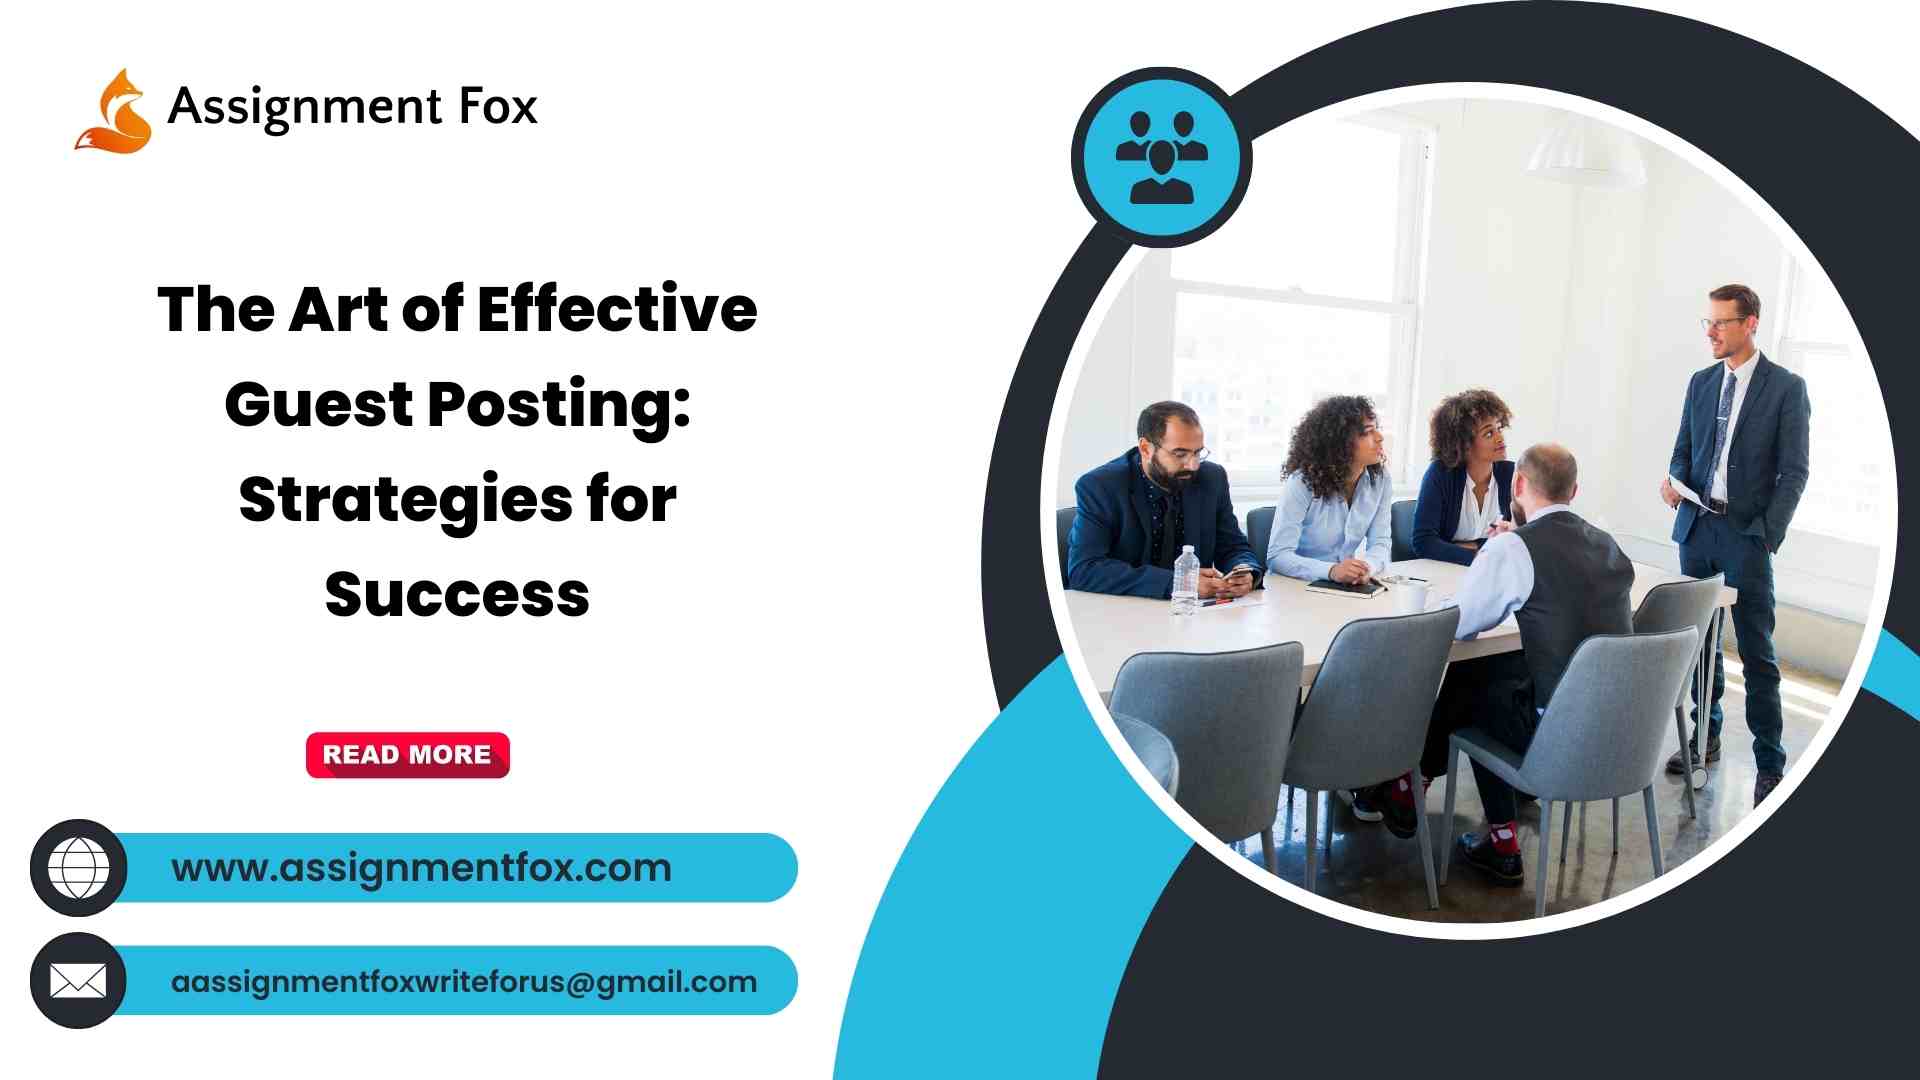 The Art of Effective Guest Posting Strategies for Success